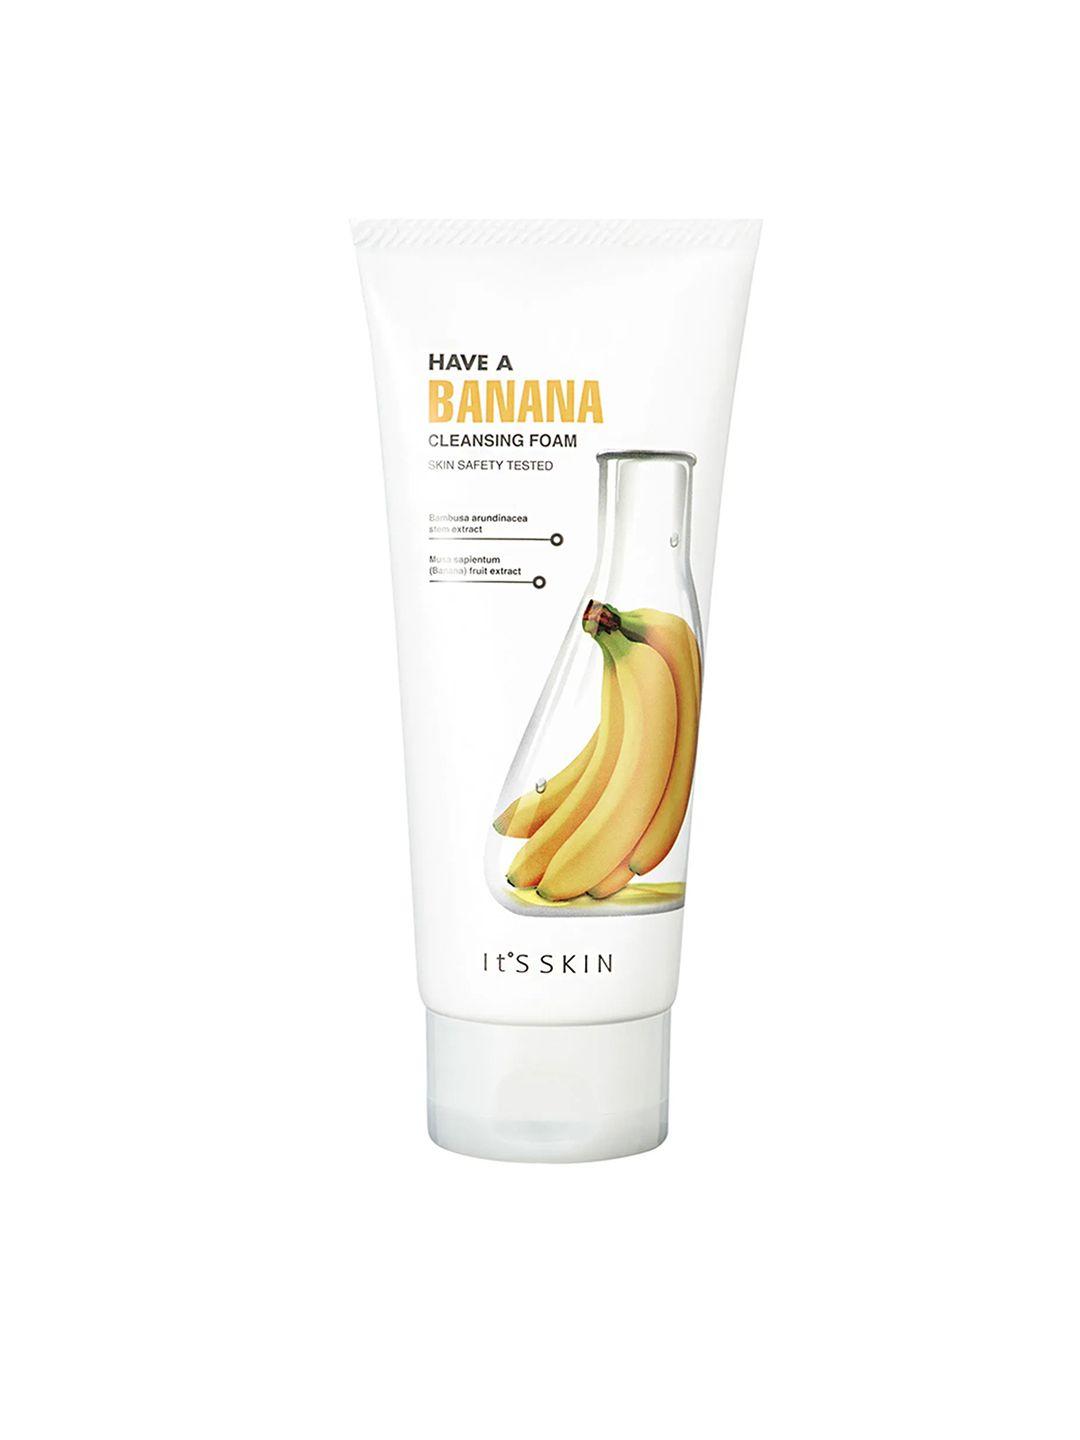 its skin unisex have a banana cleansing foam